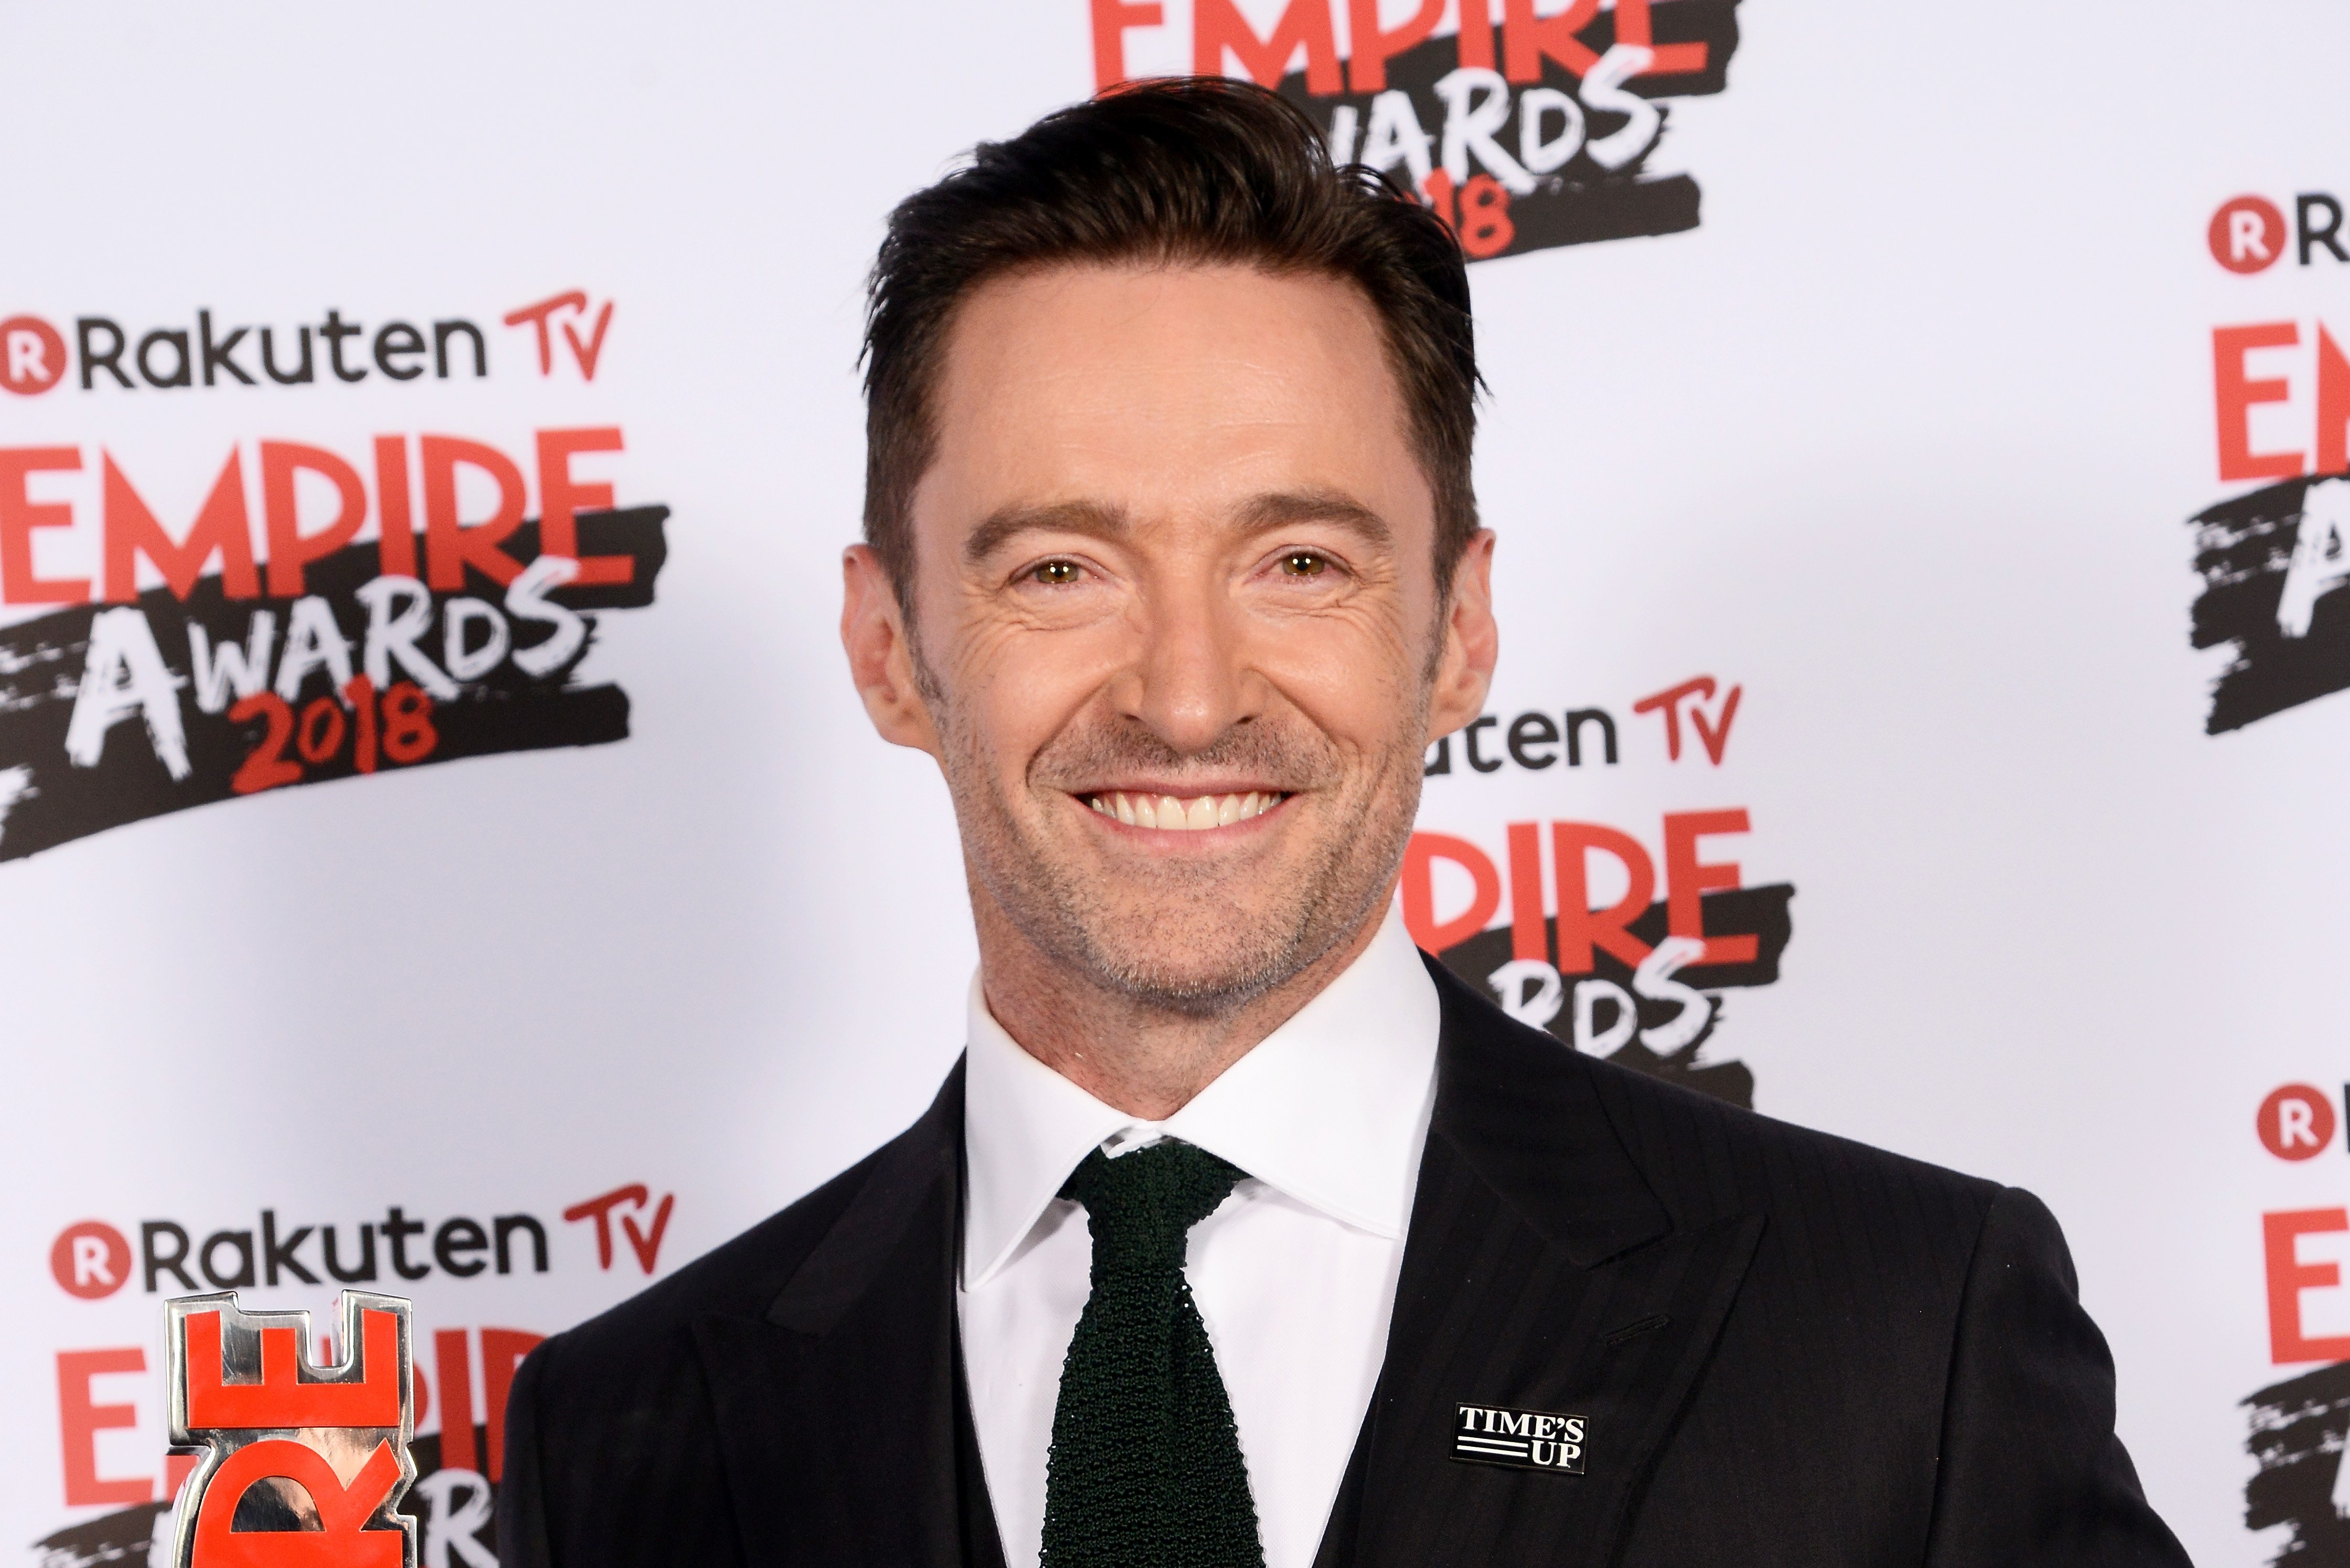 Hugh Jackman, winner of the Best Actor award, poses in the winners room at the Rakuten TV EMPIRE Awards 2018 at The Roundhouse on March 18, 2018,0 in London, England. | Source: Getty Images.